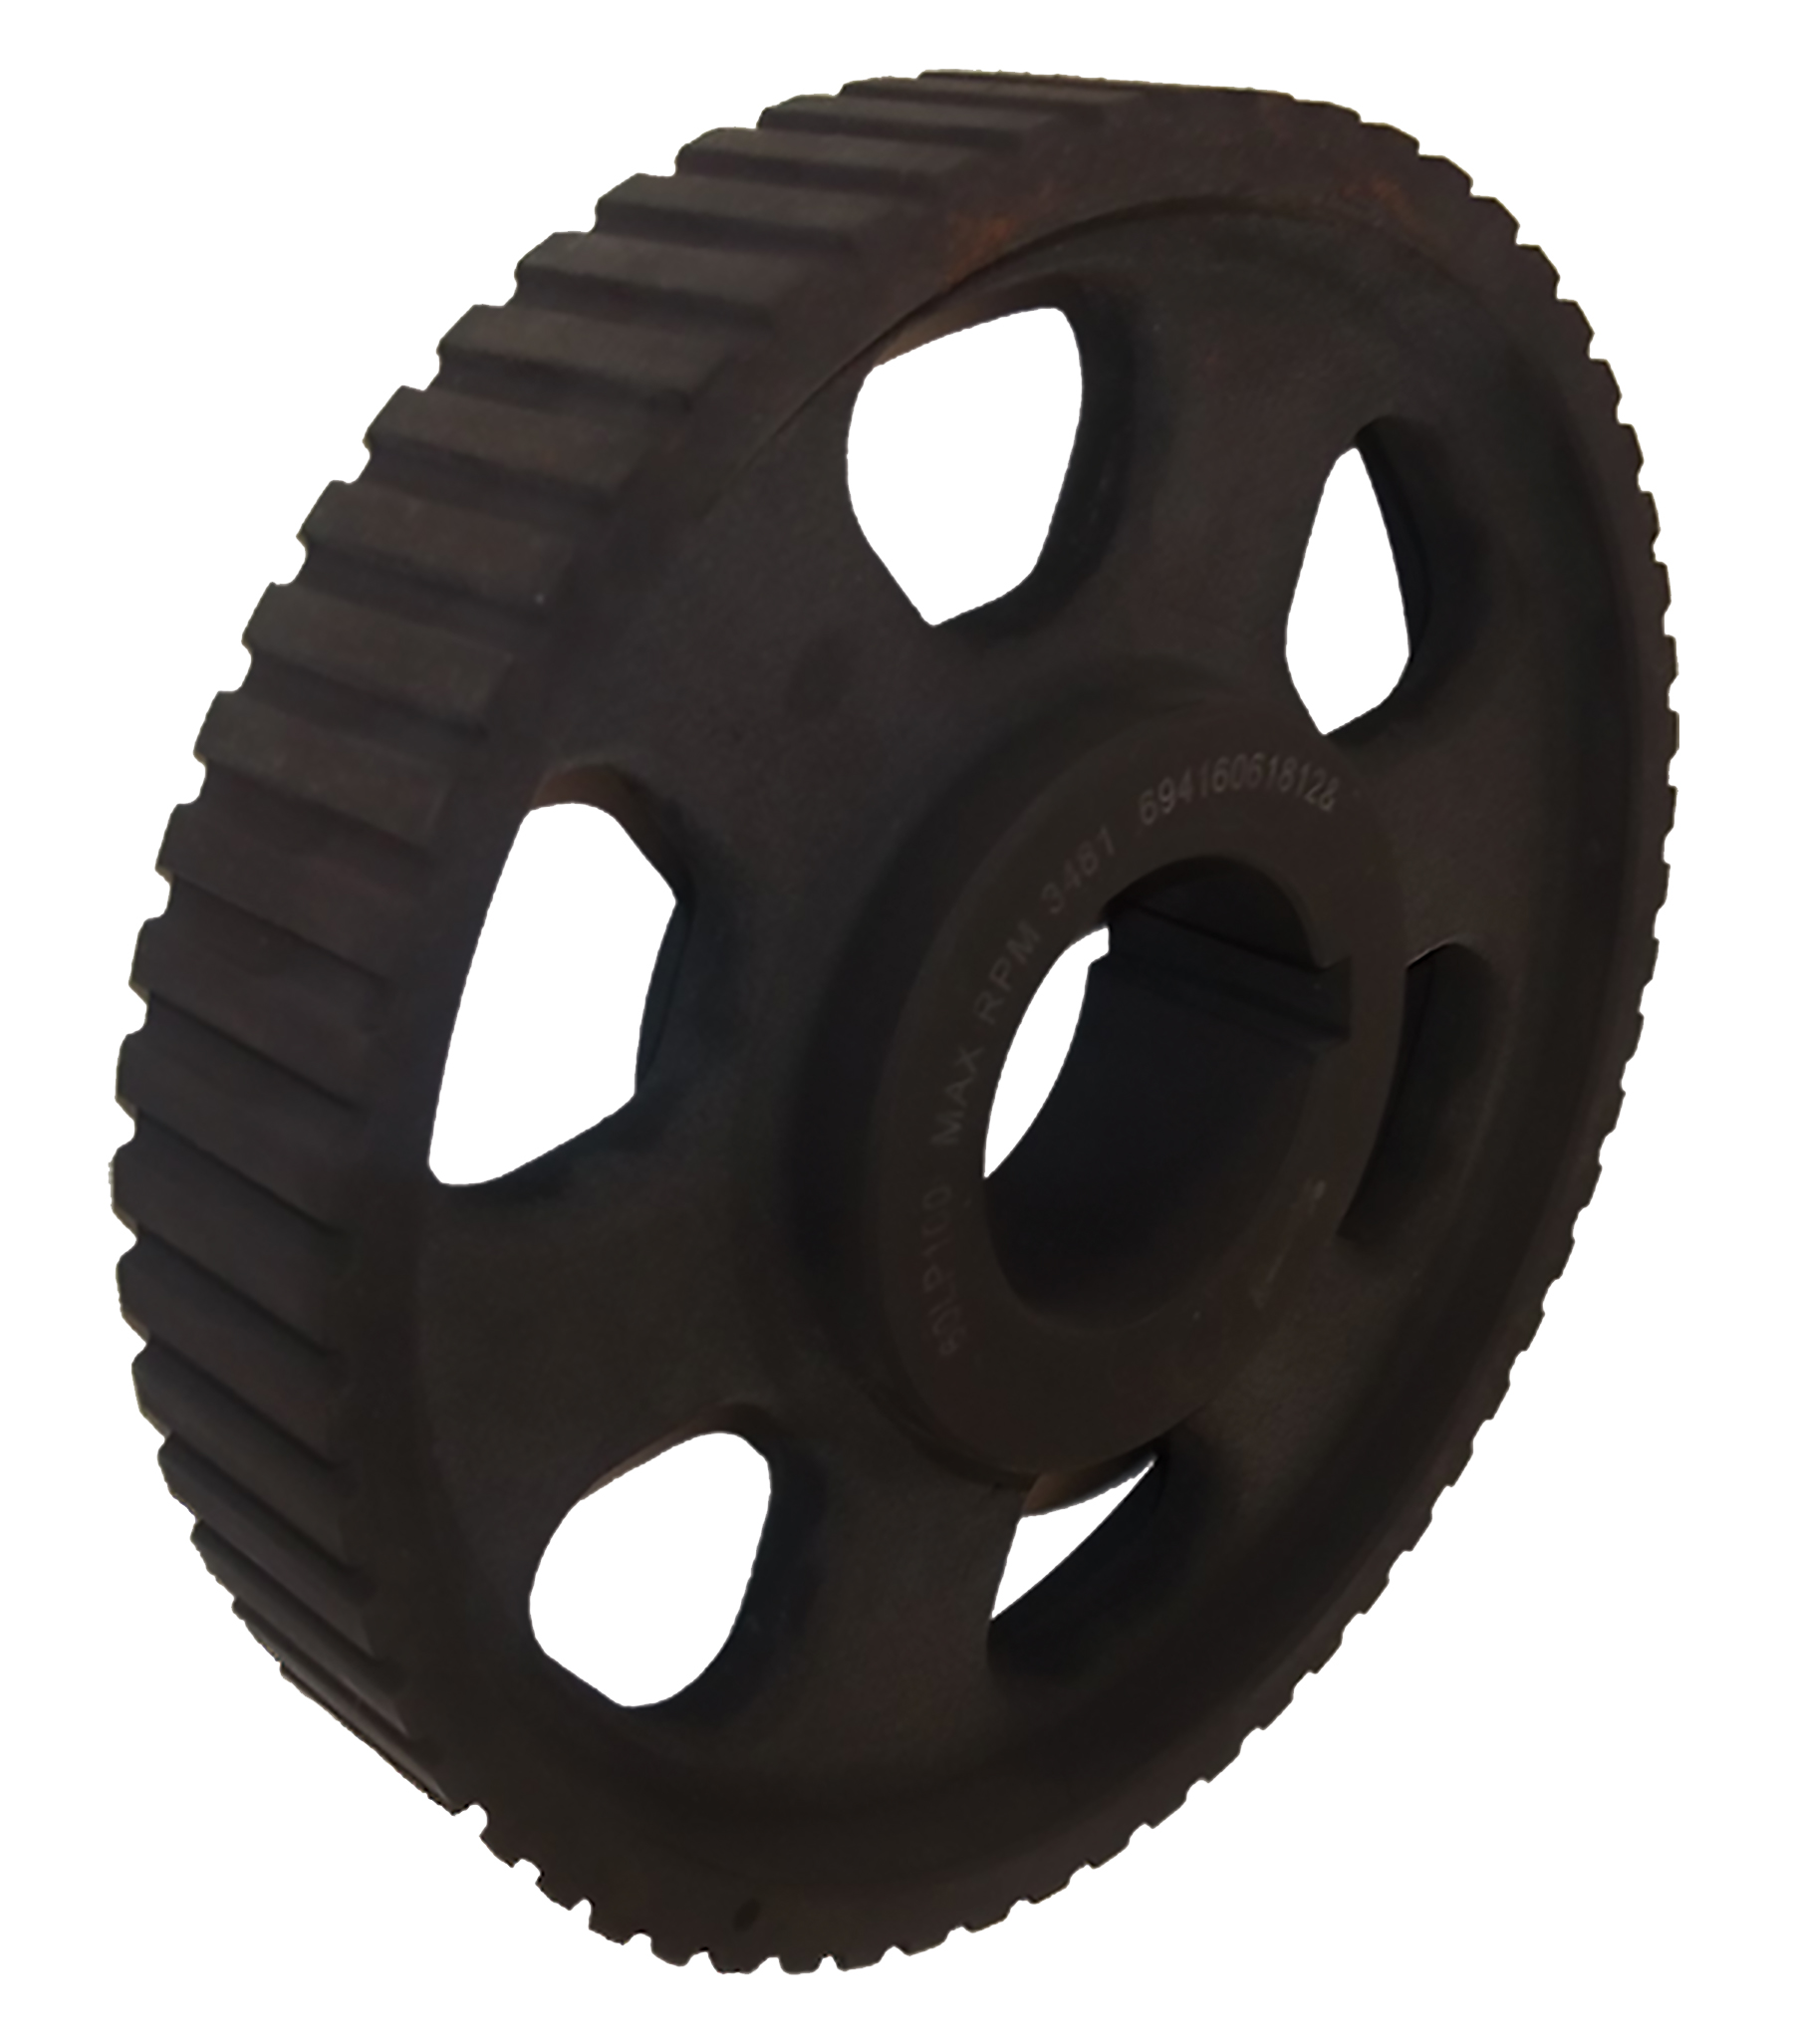 72LP100 - Cast Iron Imperial Pitch Pulleys